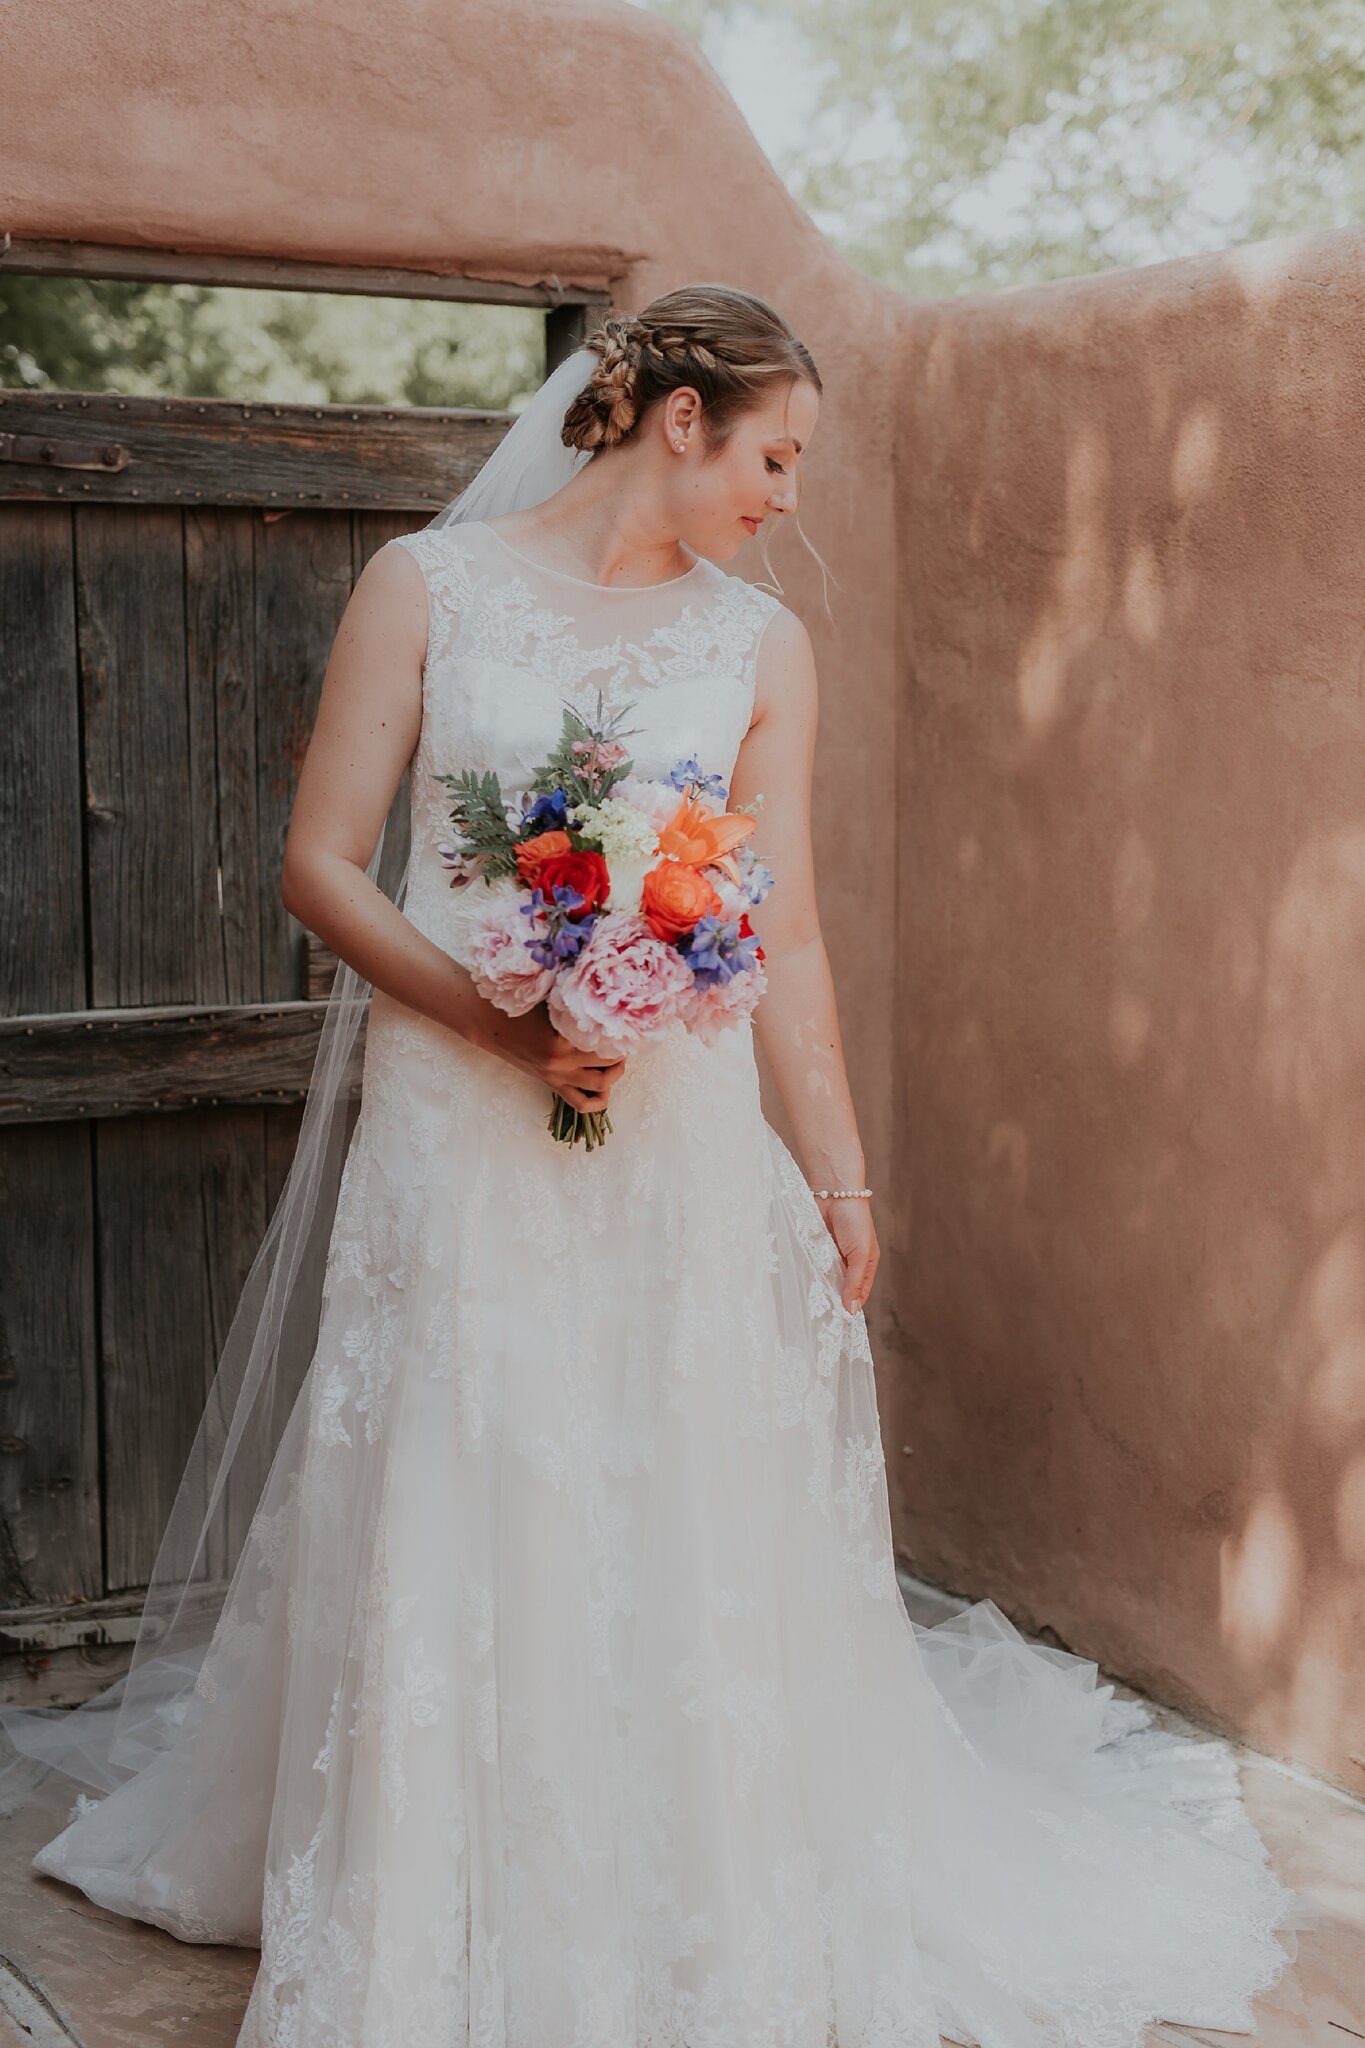 Alicia+lucia+photography+-+albuquerque+wedding+photographer+-+santa+fe+wedding+photography+-+new+mexico+wedding+photographer+-+new+mexico+wedding+-+wedding+gowns+-+trumpet+wedding+gown+-+bridal+gowns_0058.jpg